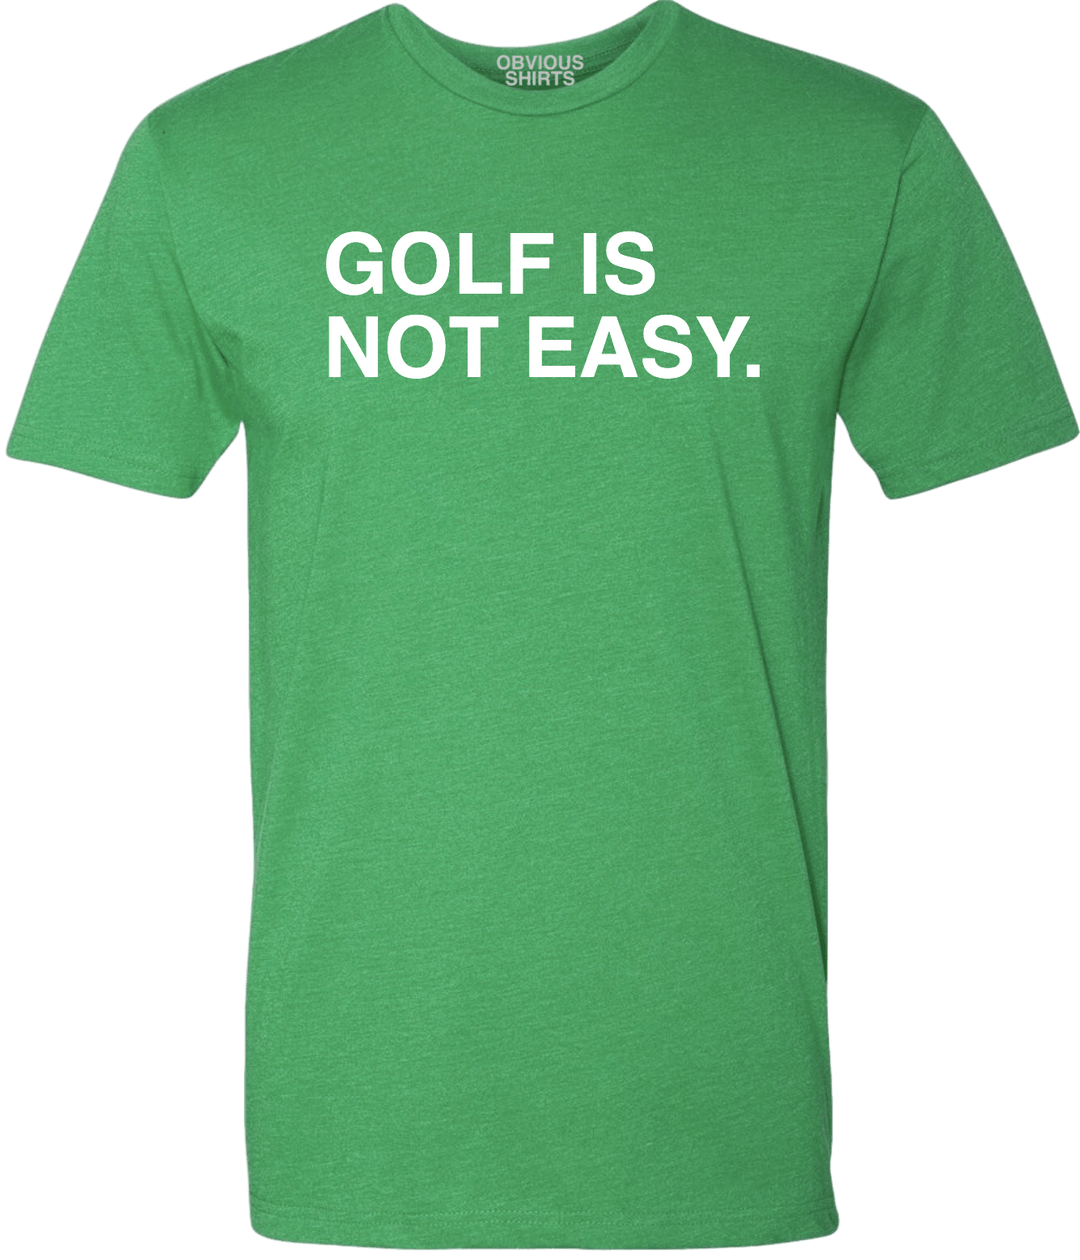 GOLF IS NOT EASY. - OBVIOUS SHIRTS.